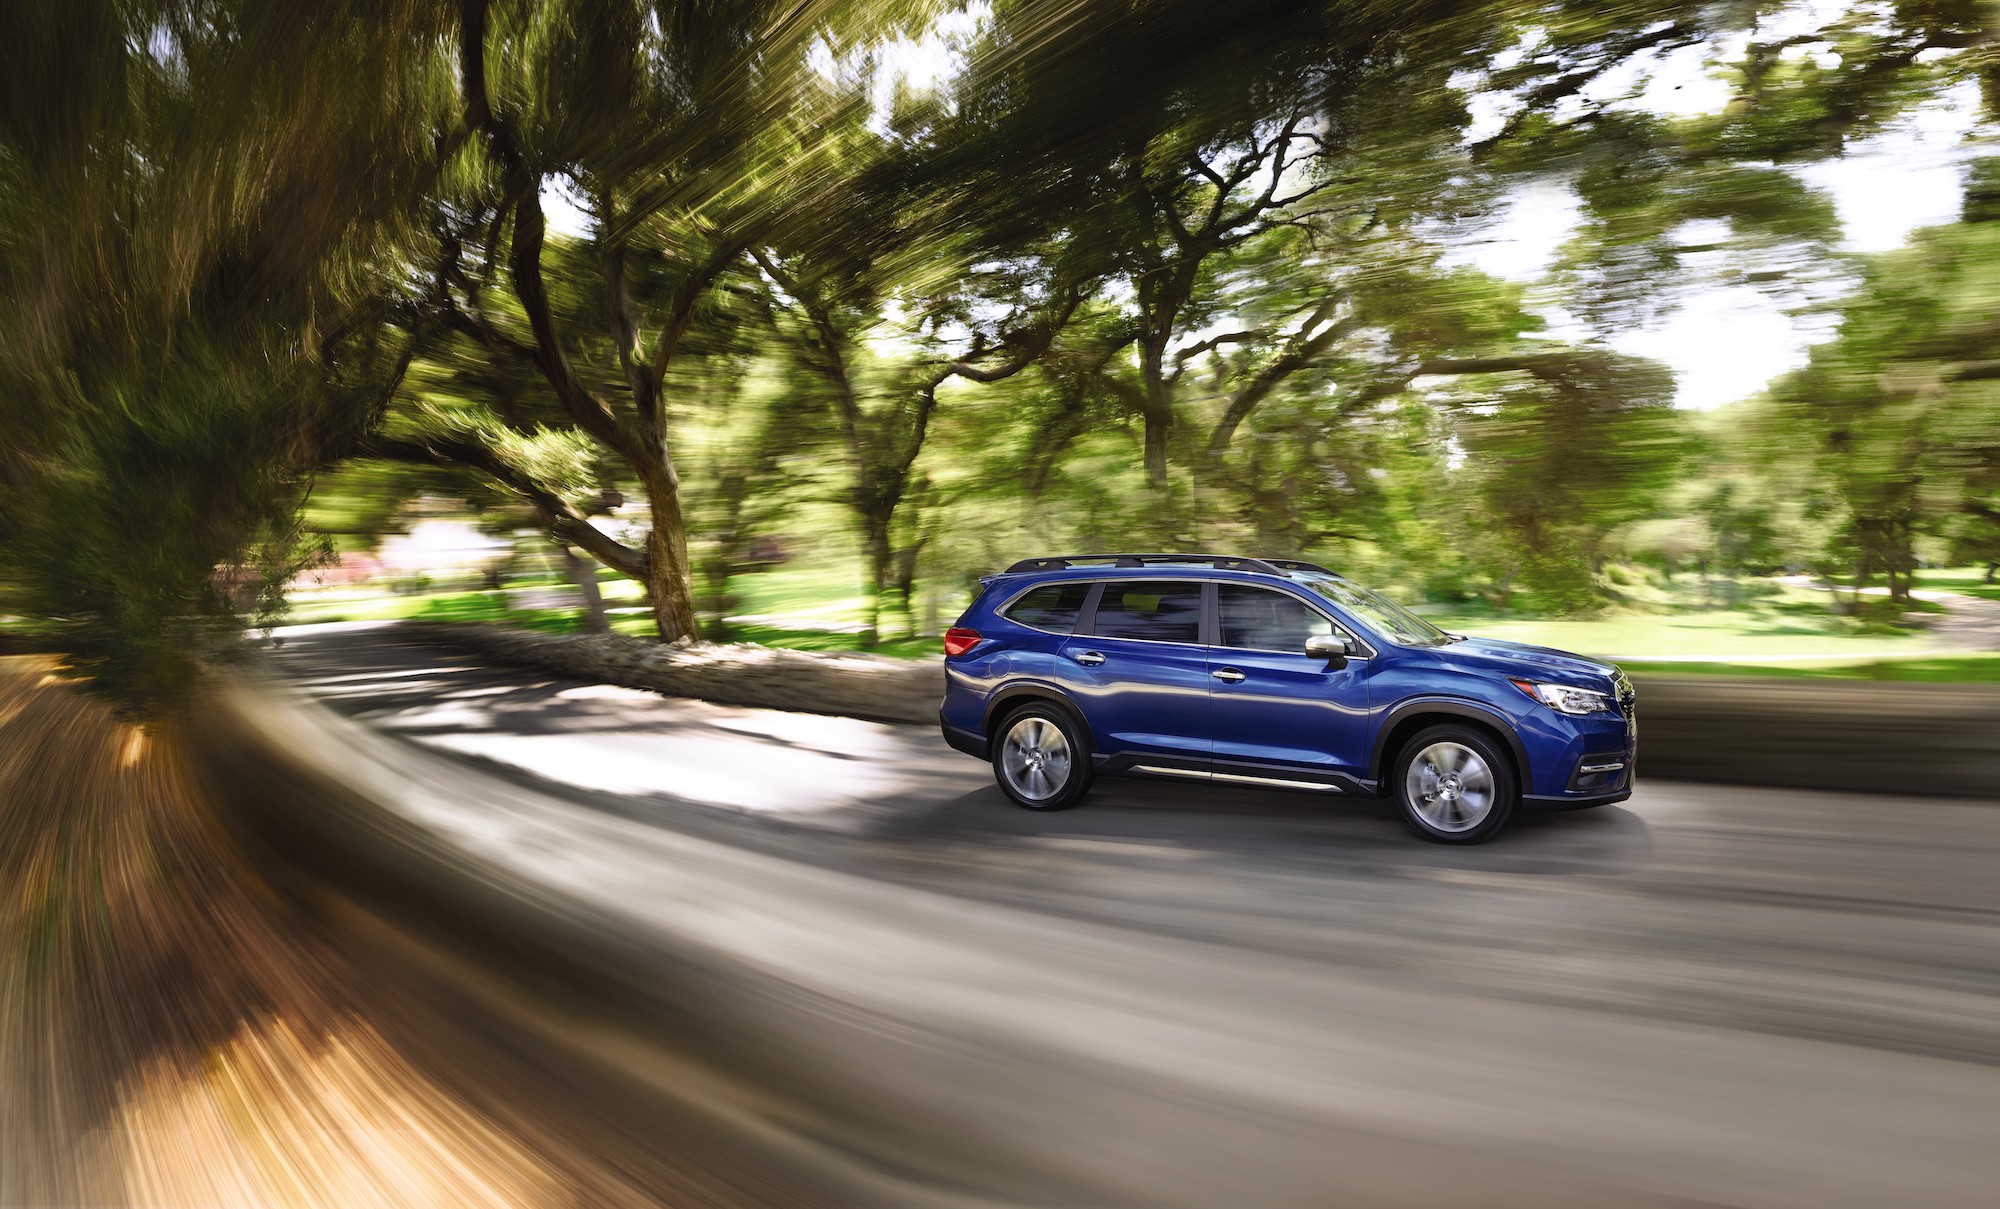 A blue 2021 Subaru Ascent travels on a residential street lined by trees